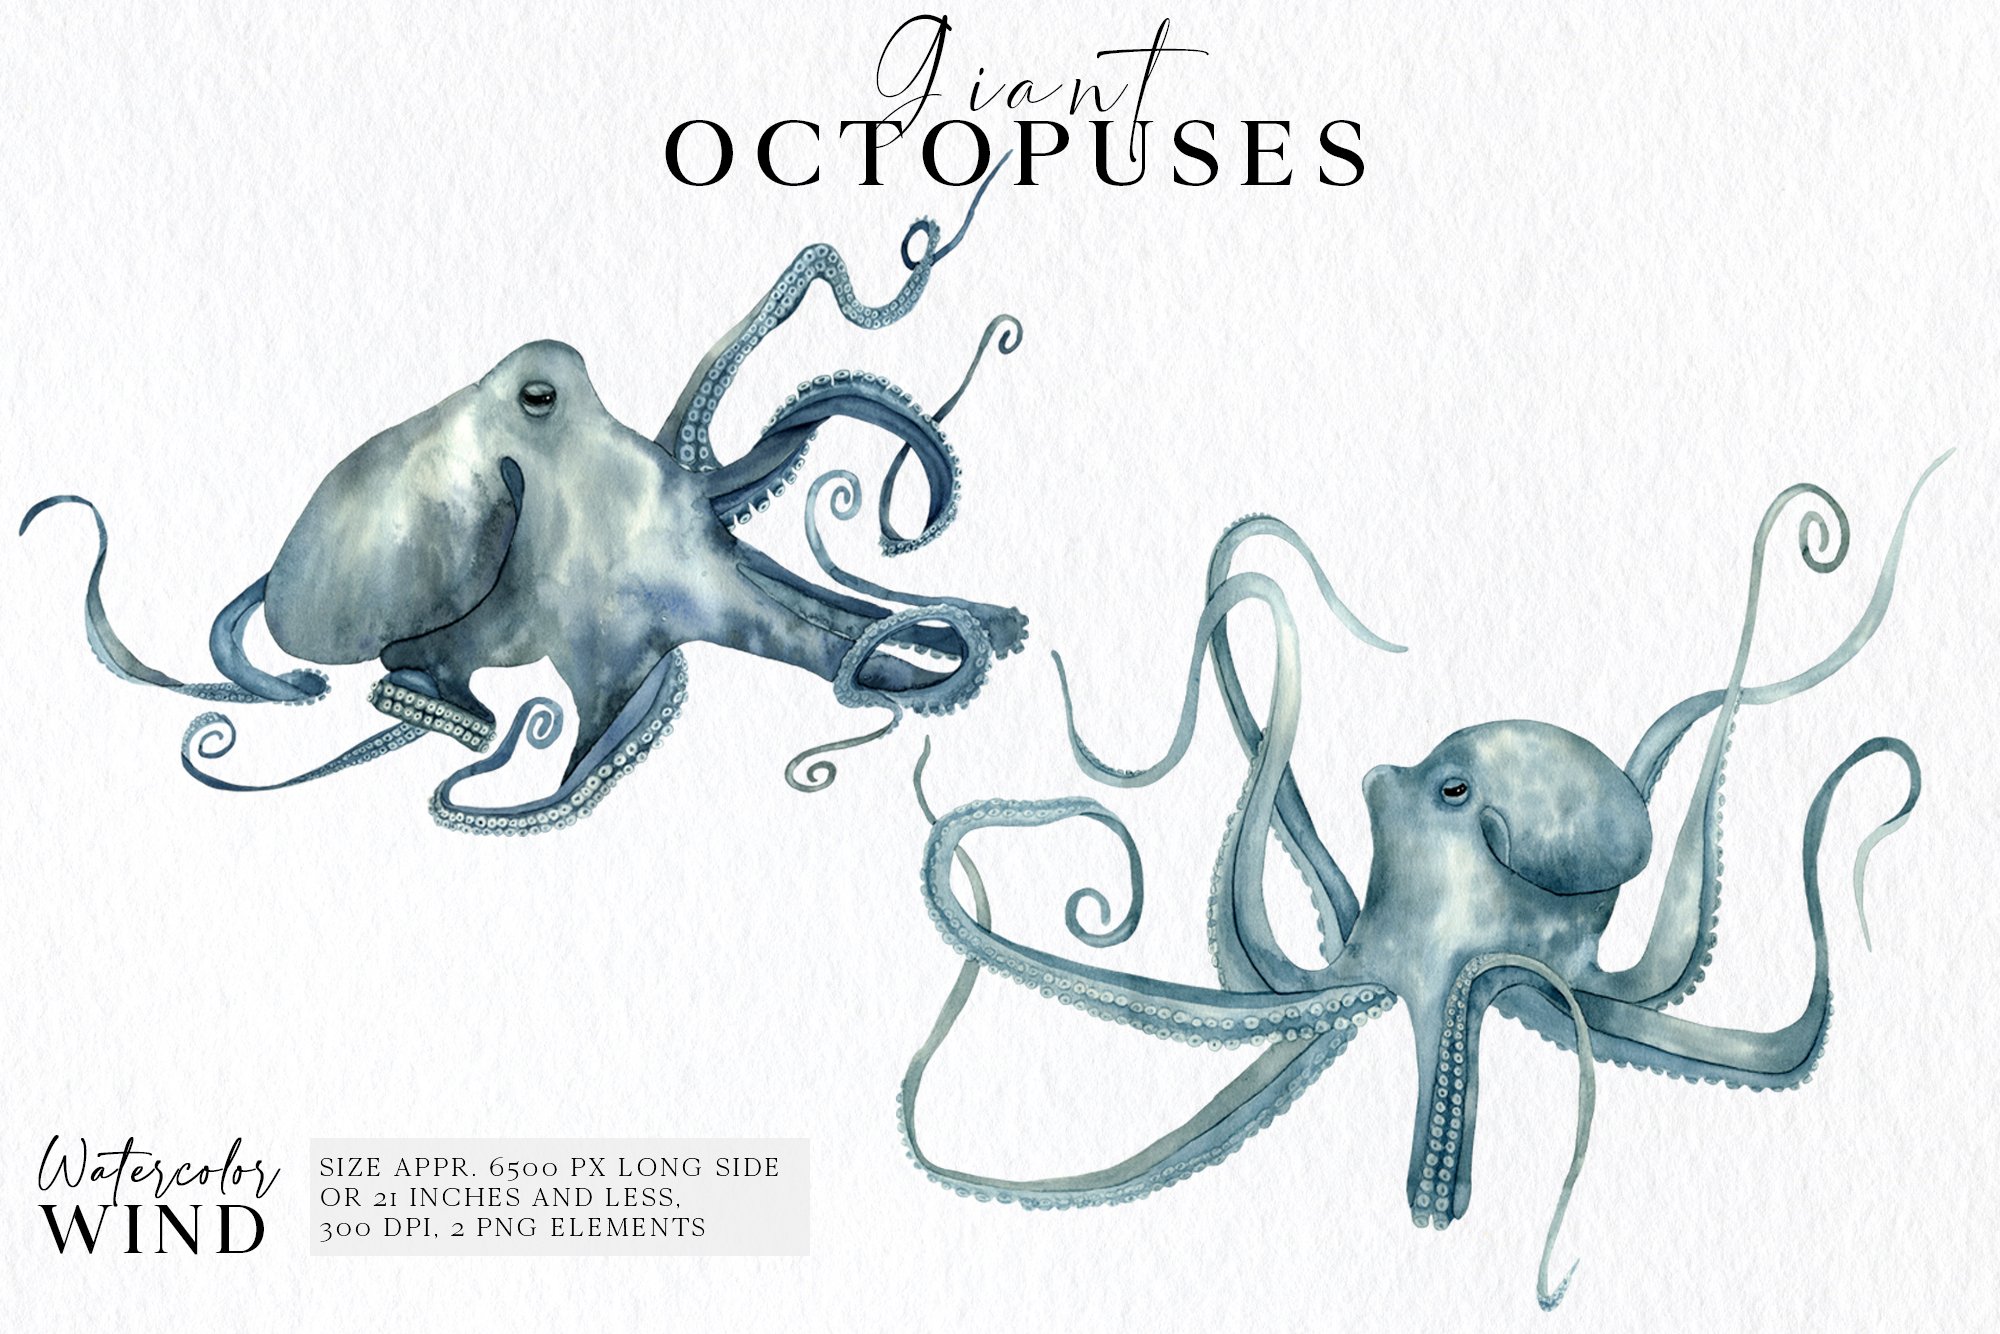 So cool two octopuses.